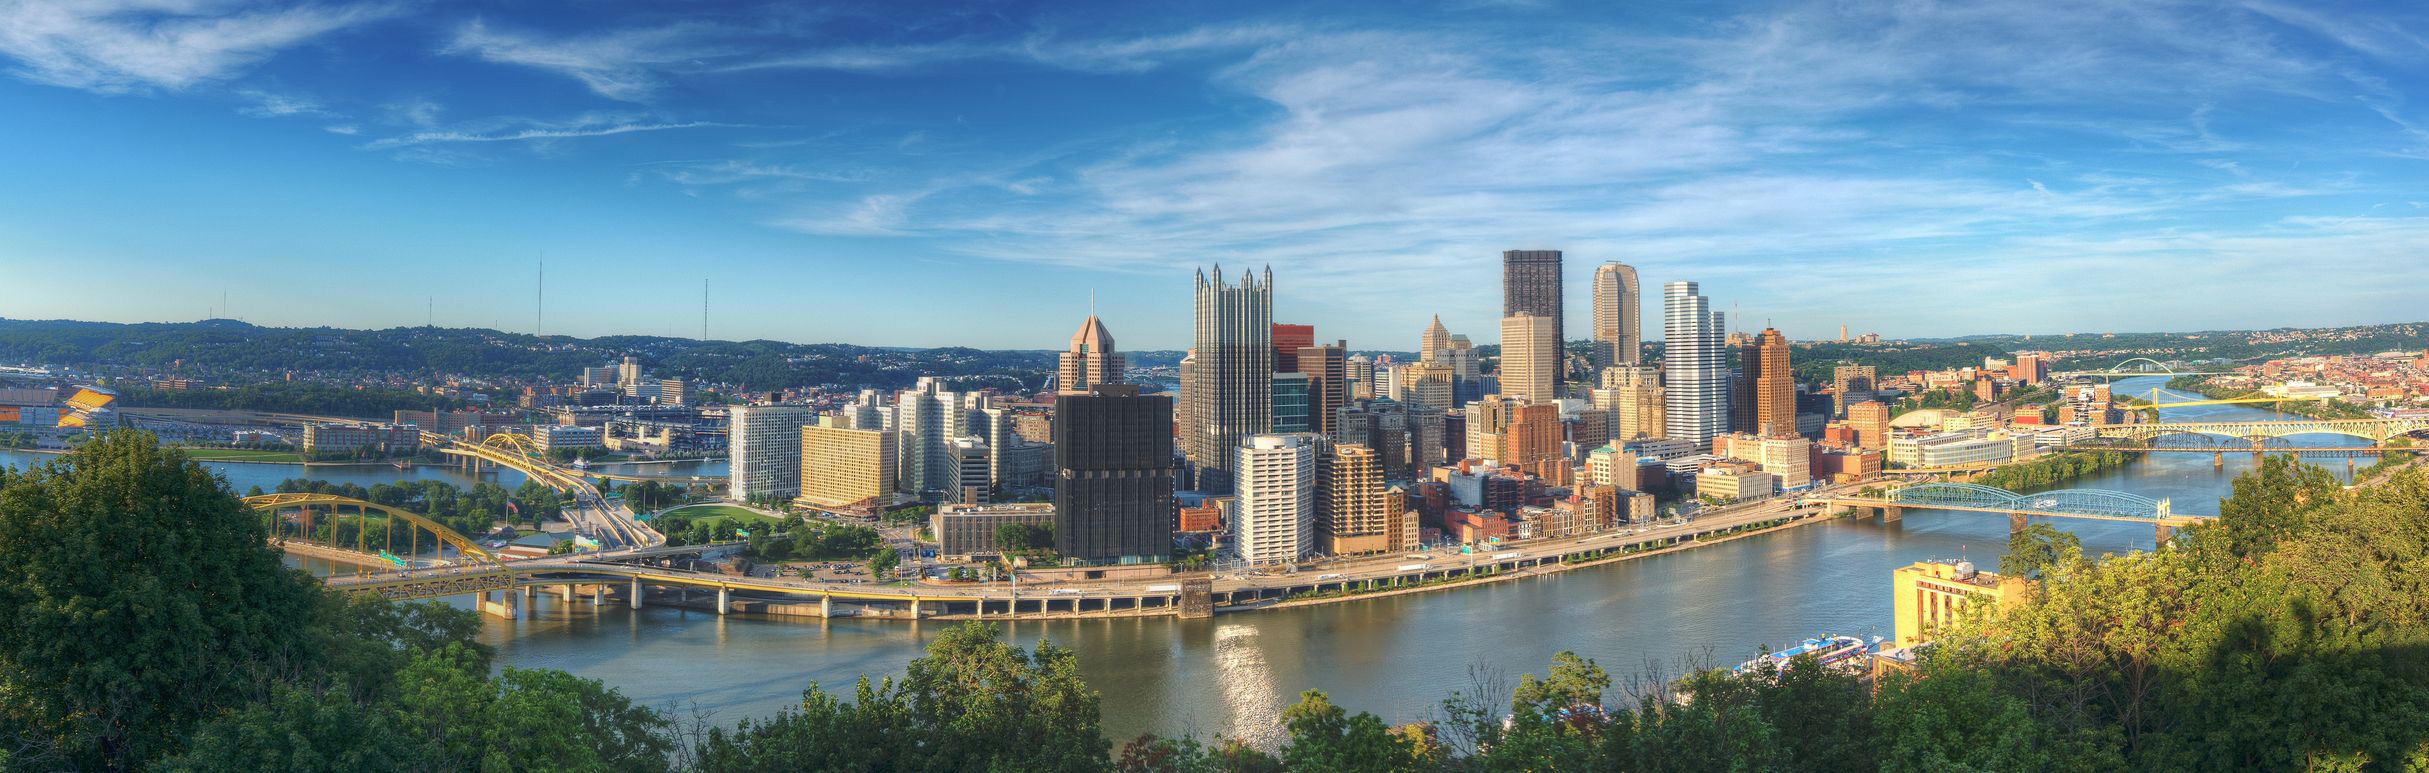 Headquartered in Pittsburgh For More Than 25 Years